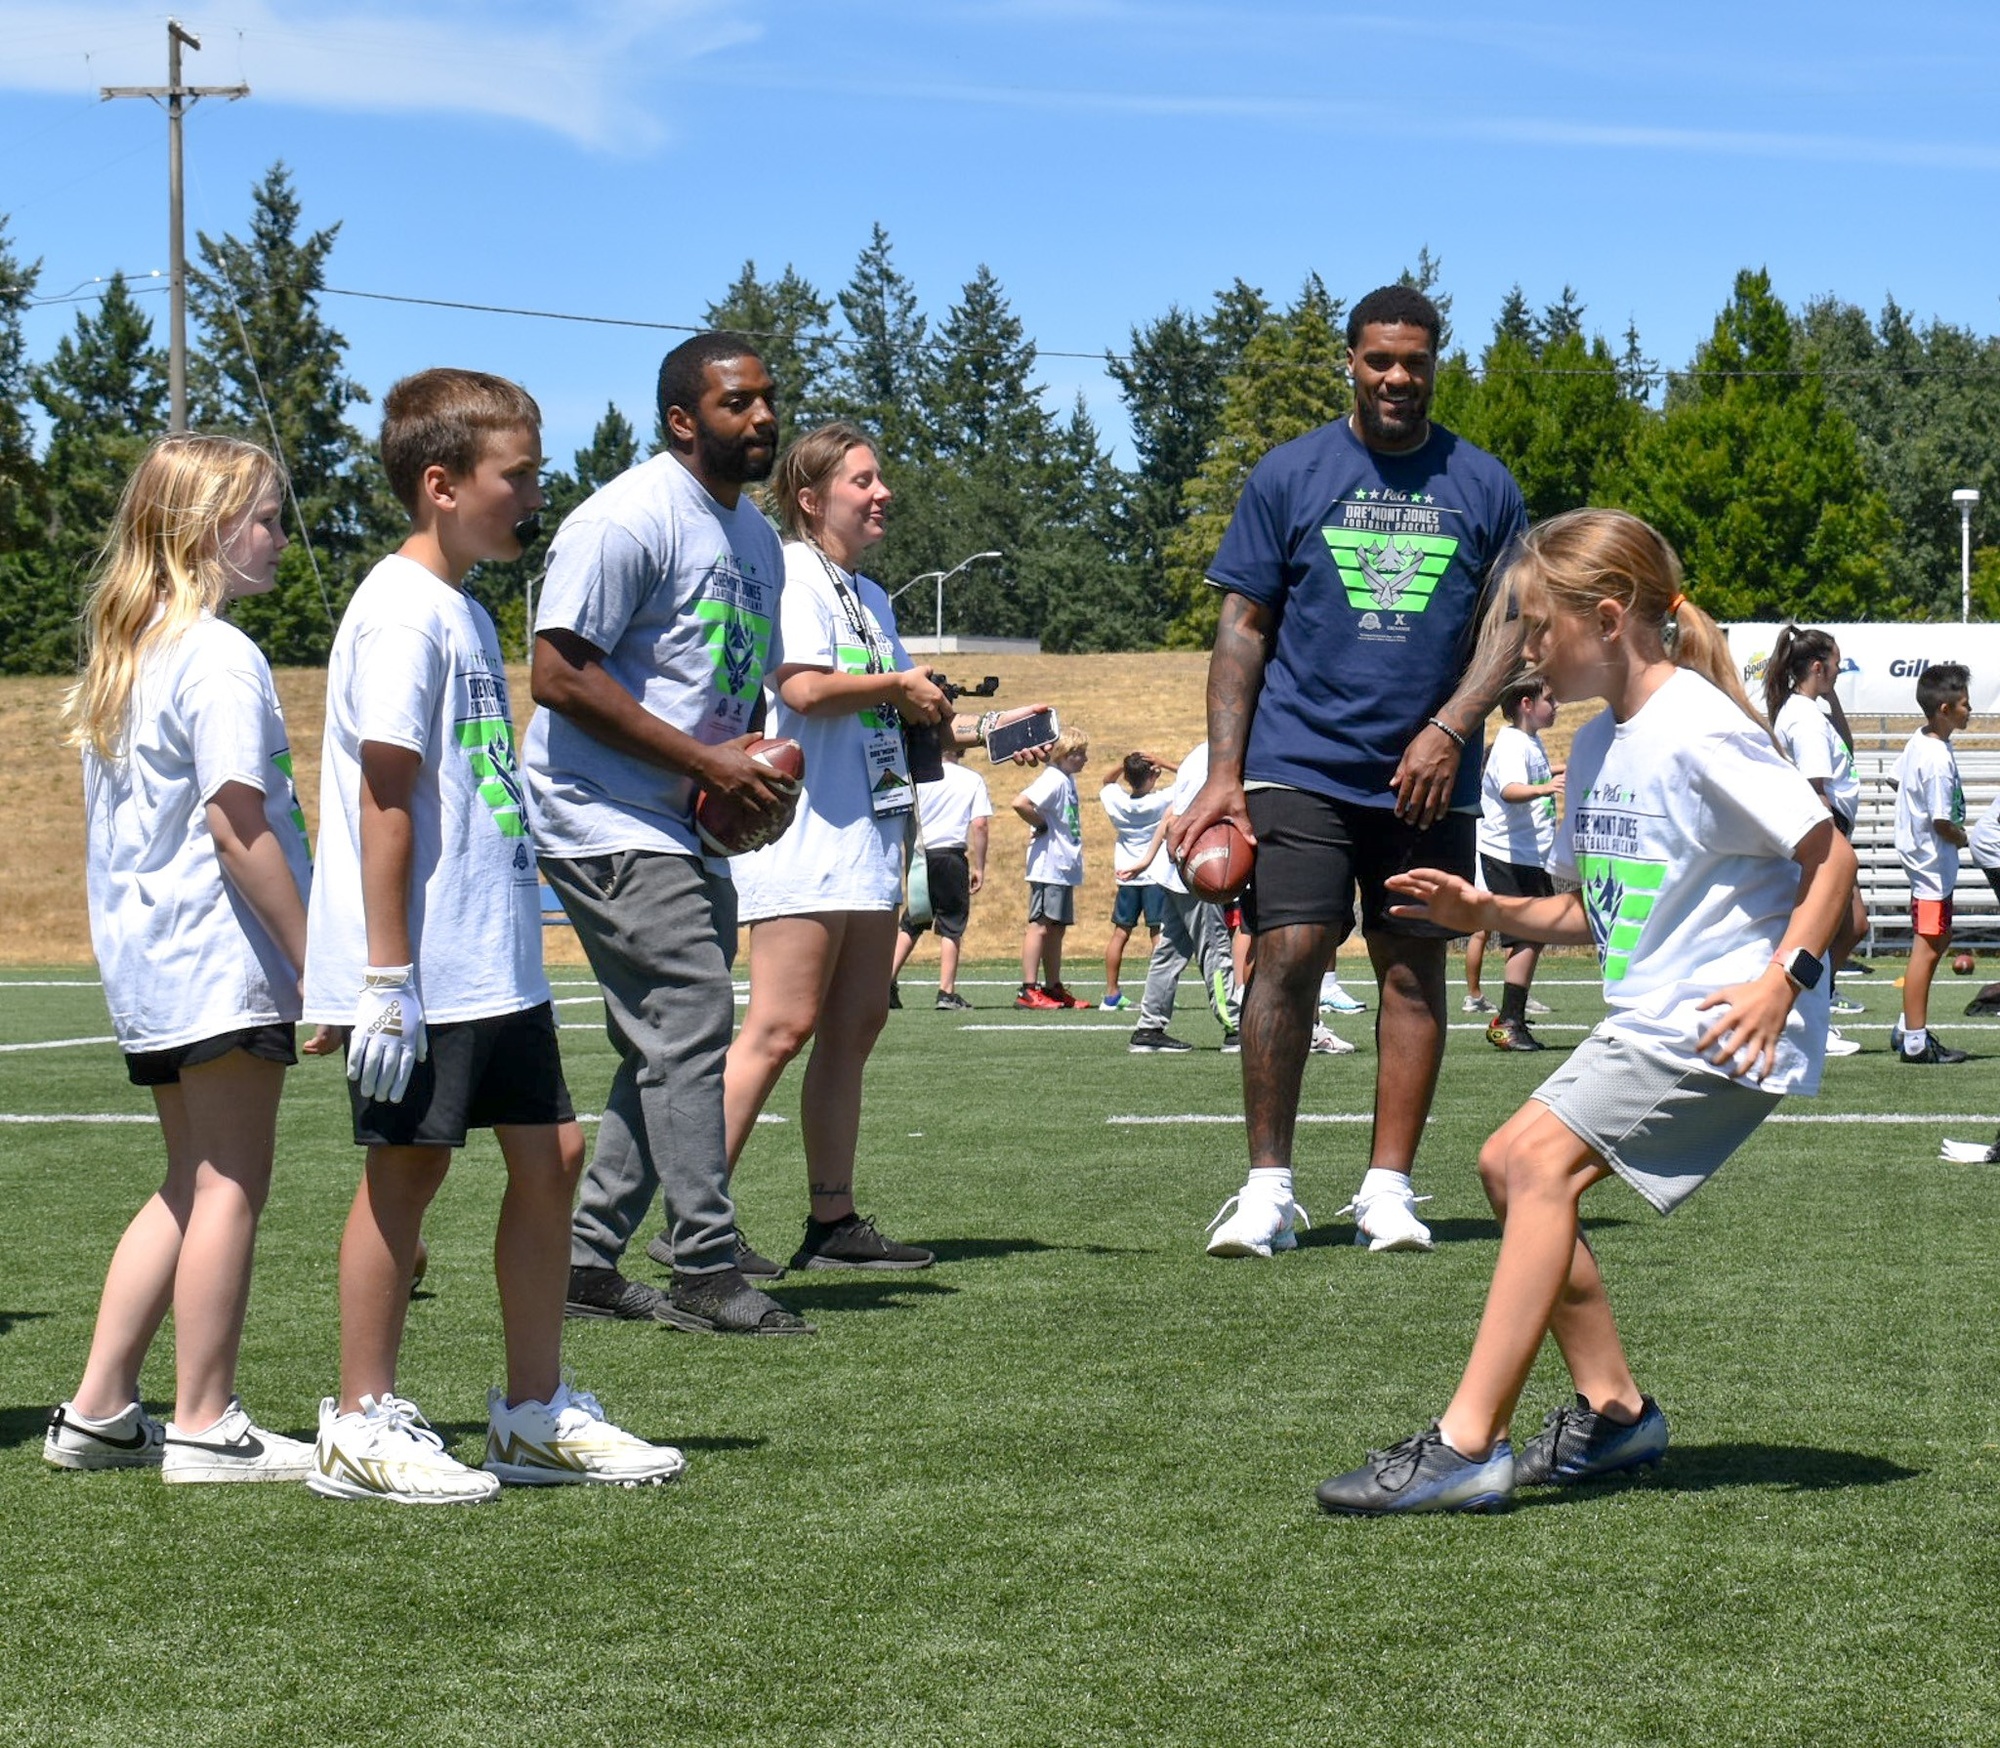 DVIDS - Images - Seahawks player aims to inspire JBLM youth [Image 1 of 4]